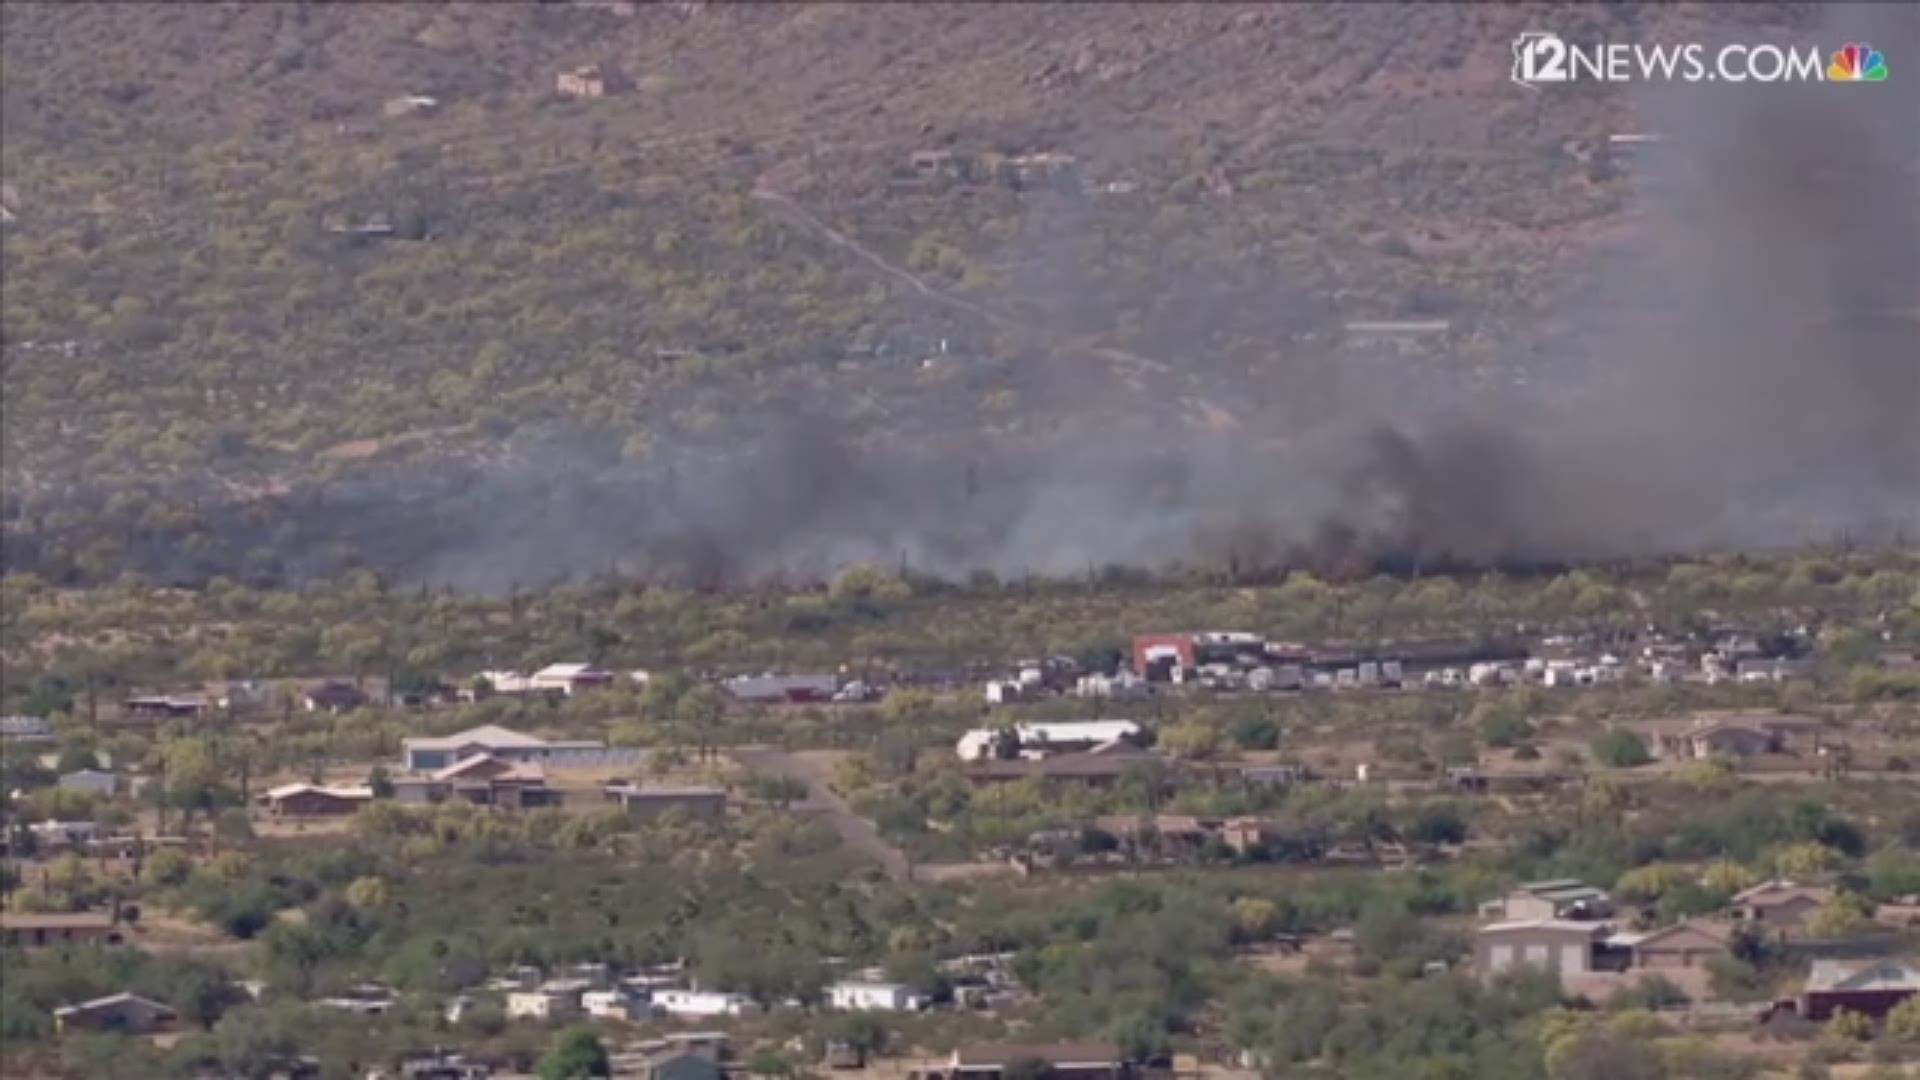 Over 50 firefighters are still working to put out a brush fire that's forced road closures and evacuations in Apache Junction. The fire is near the rodeo grounds.